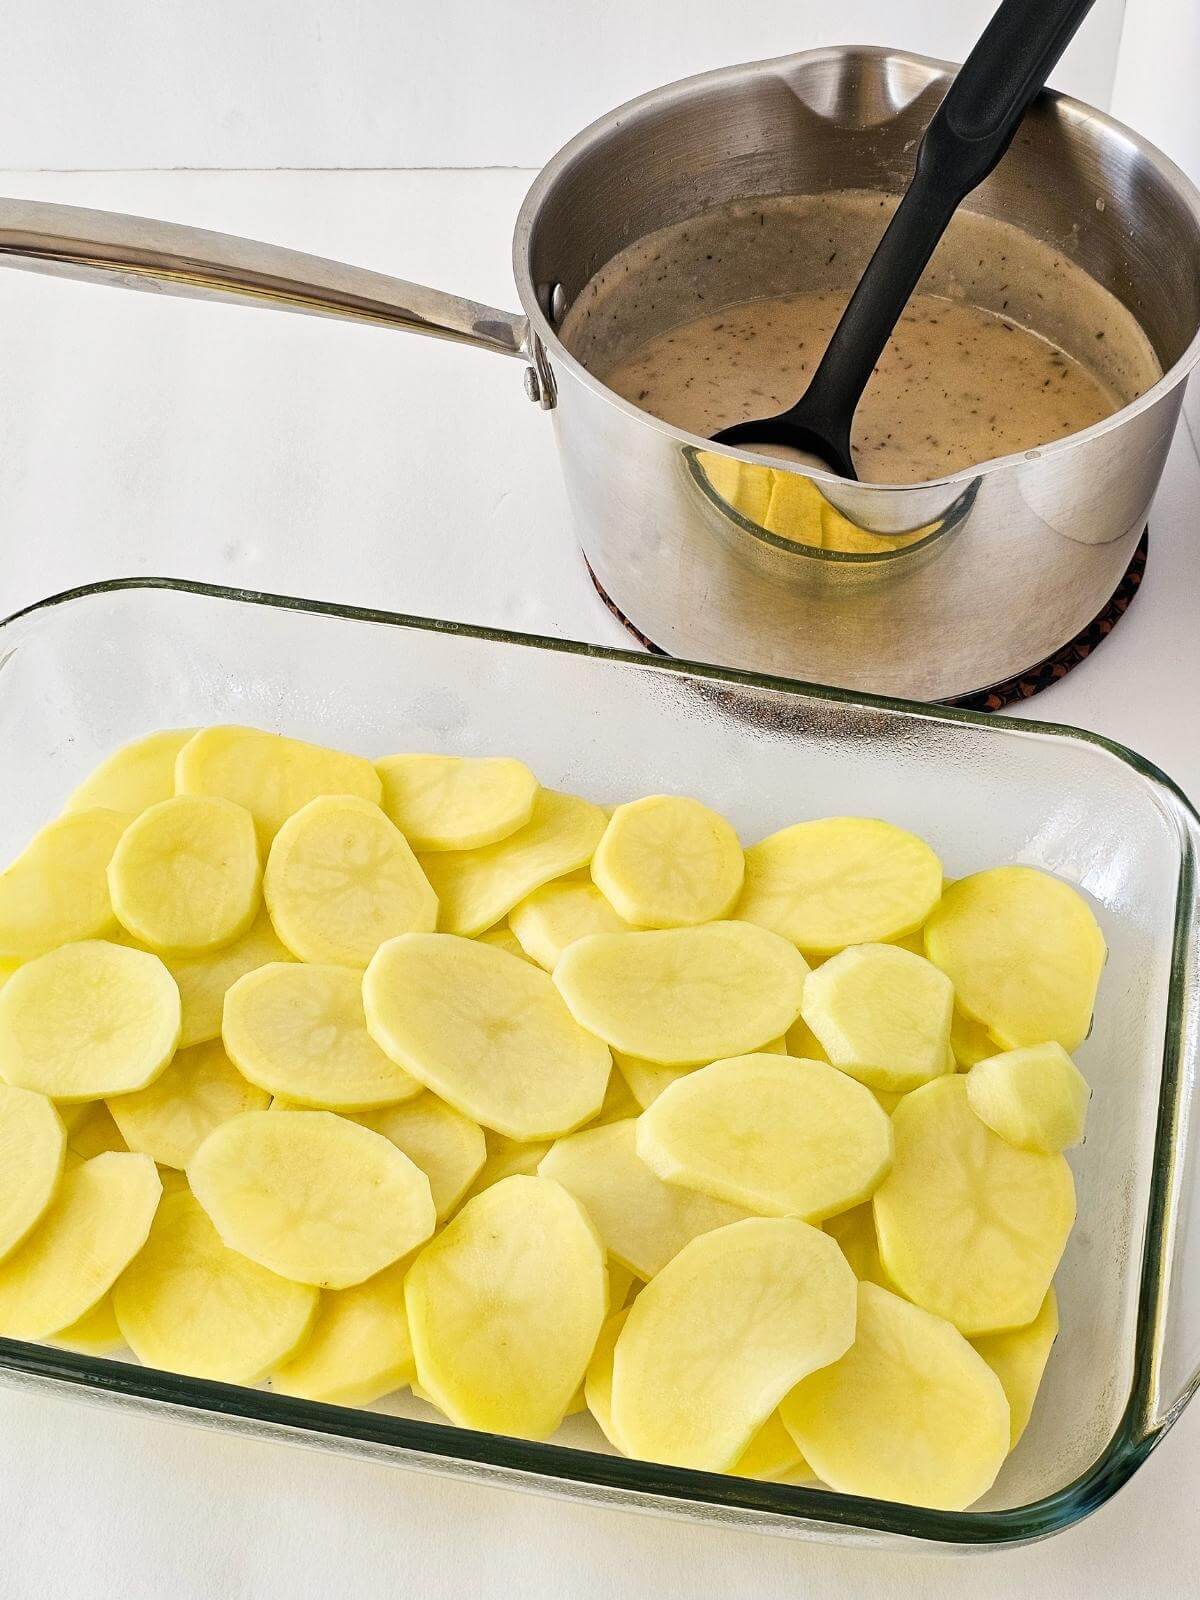 Slices of potatoes layered in a casserole dish.